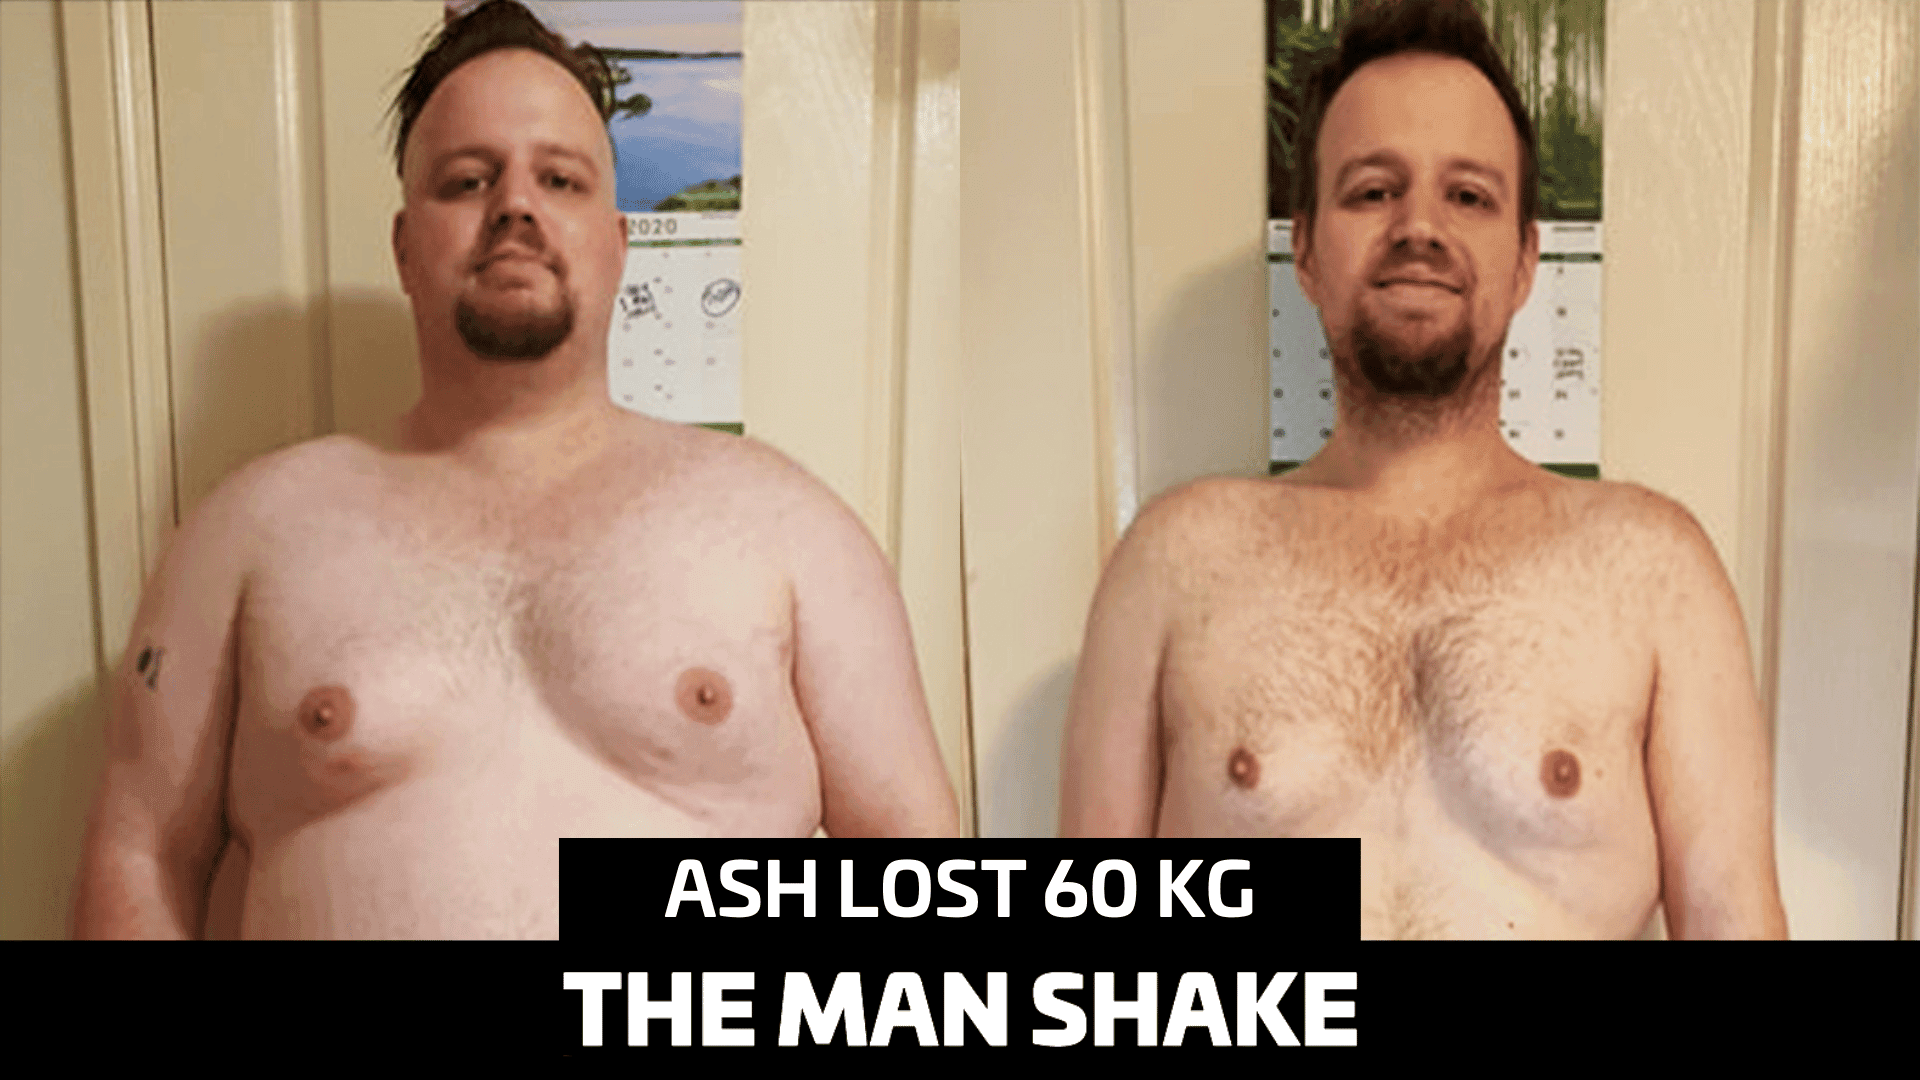 Ash lost 60kg and is now on a mission!